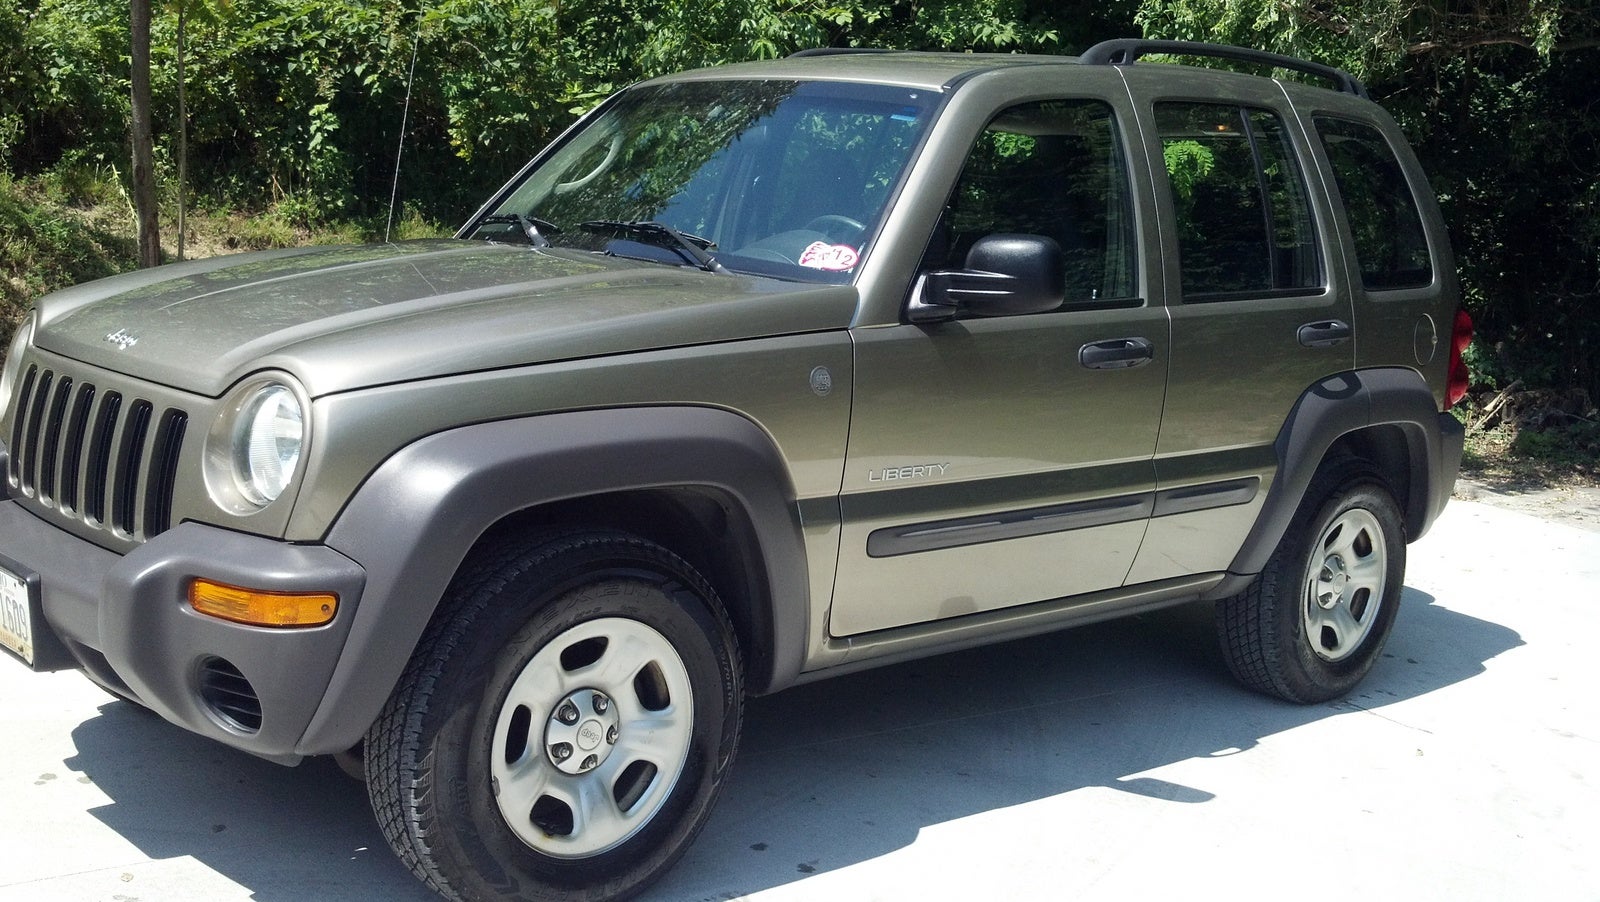 2004 Jeep Liberty Pictures CarGurus